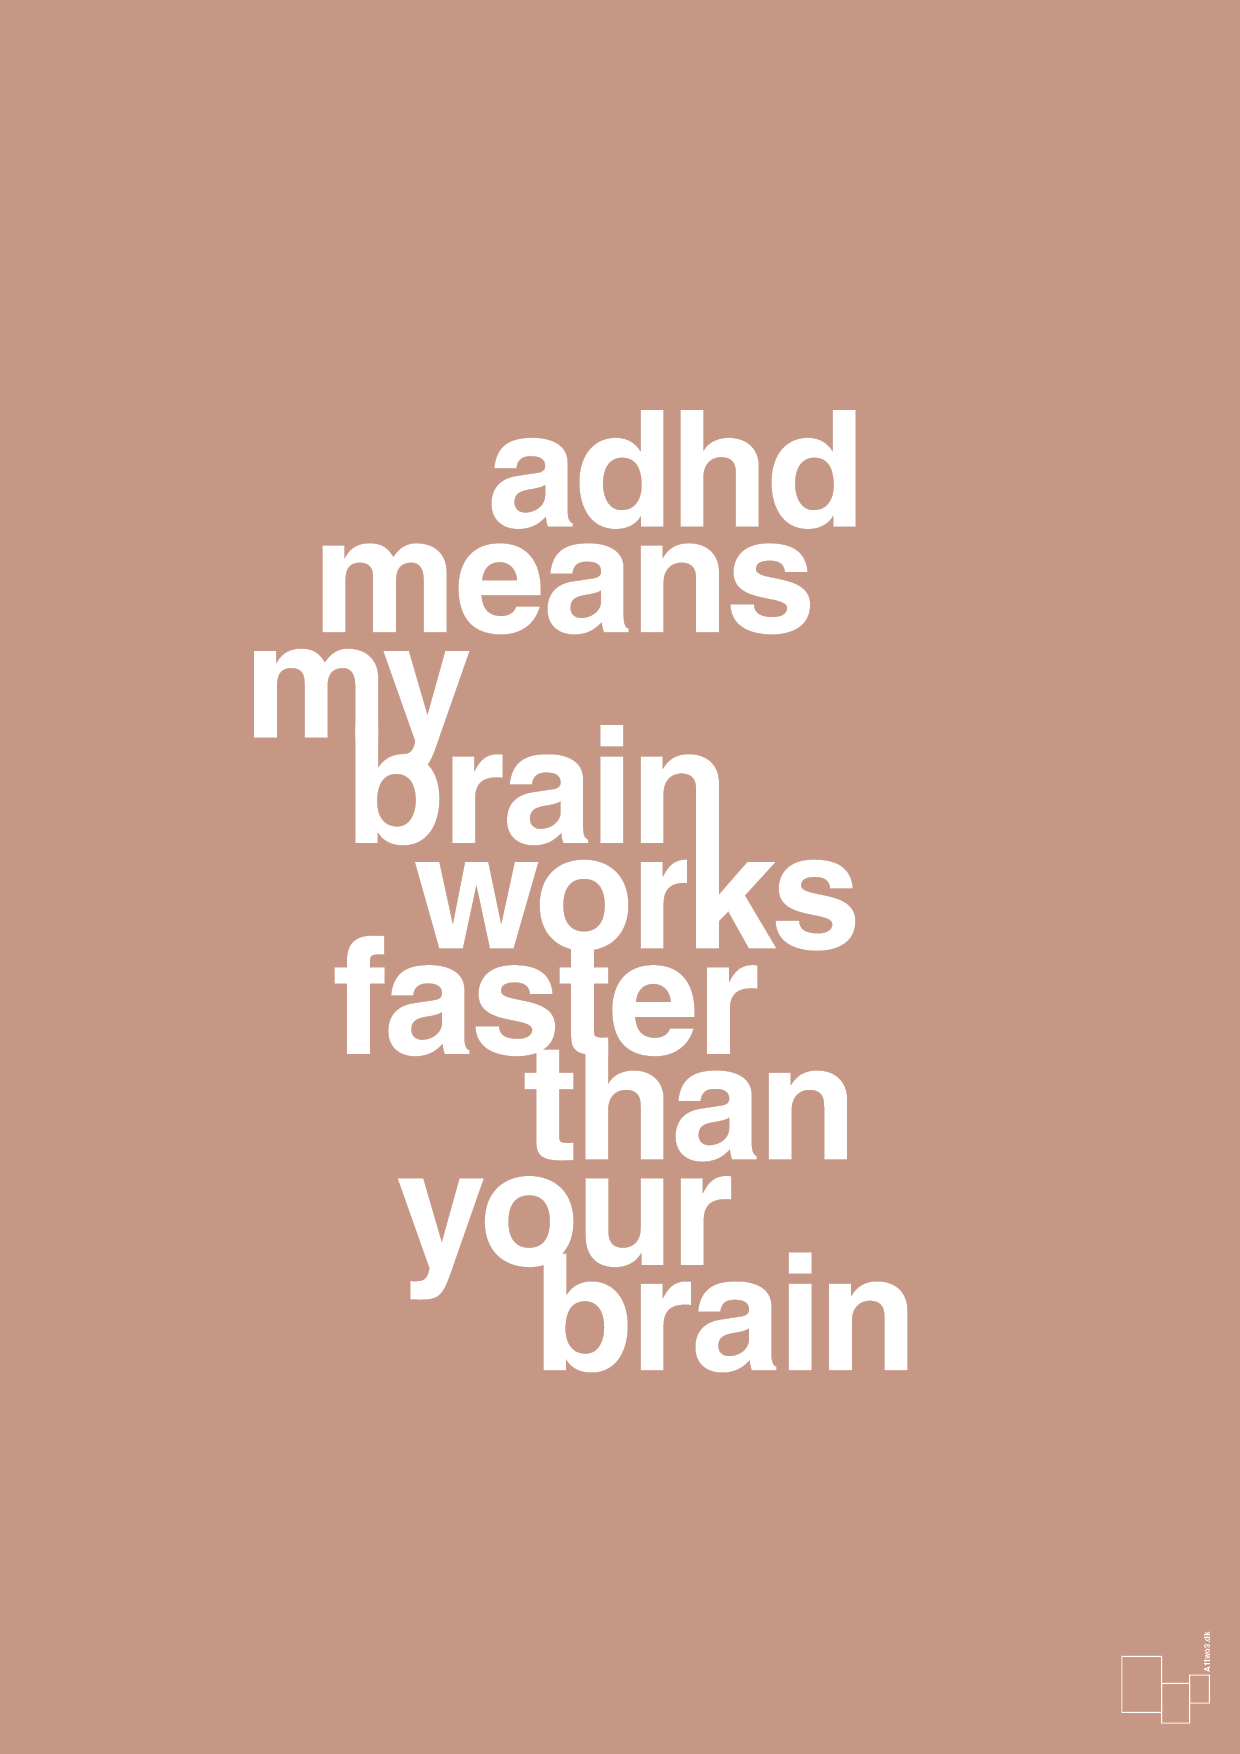 adhd means my brain works faster than your brain - Plakat med Samfund i Powder